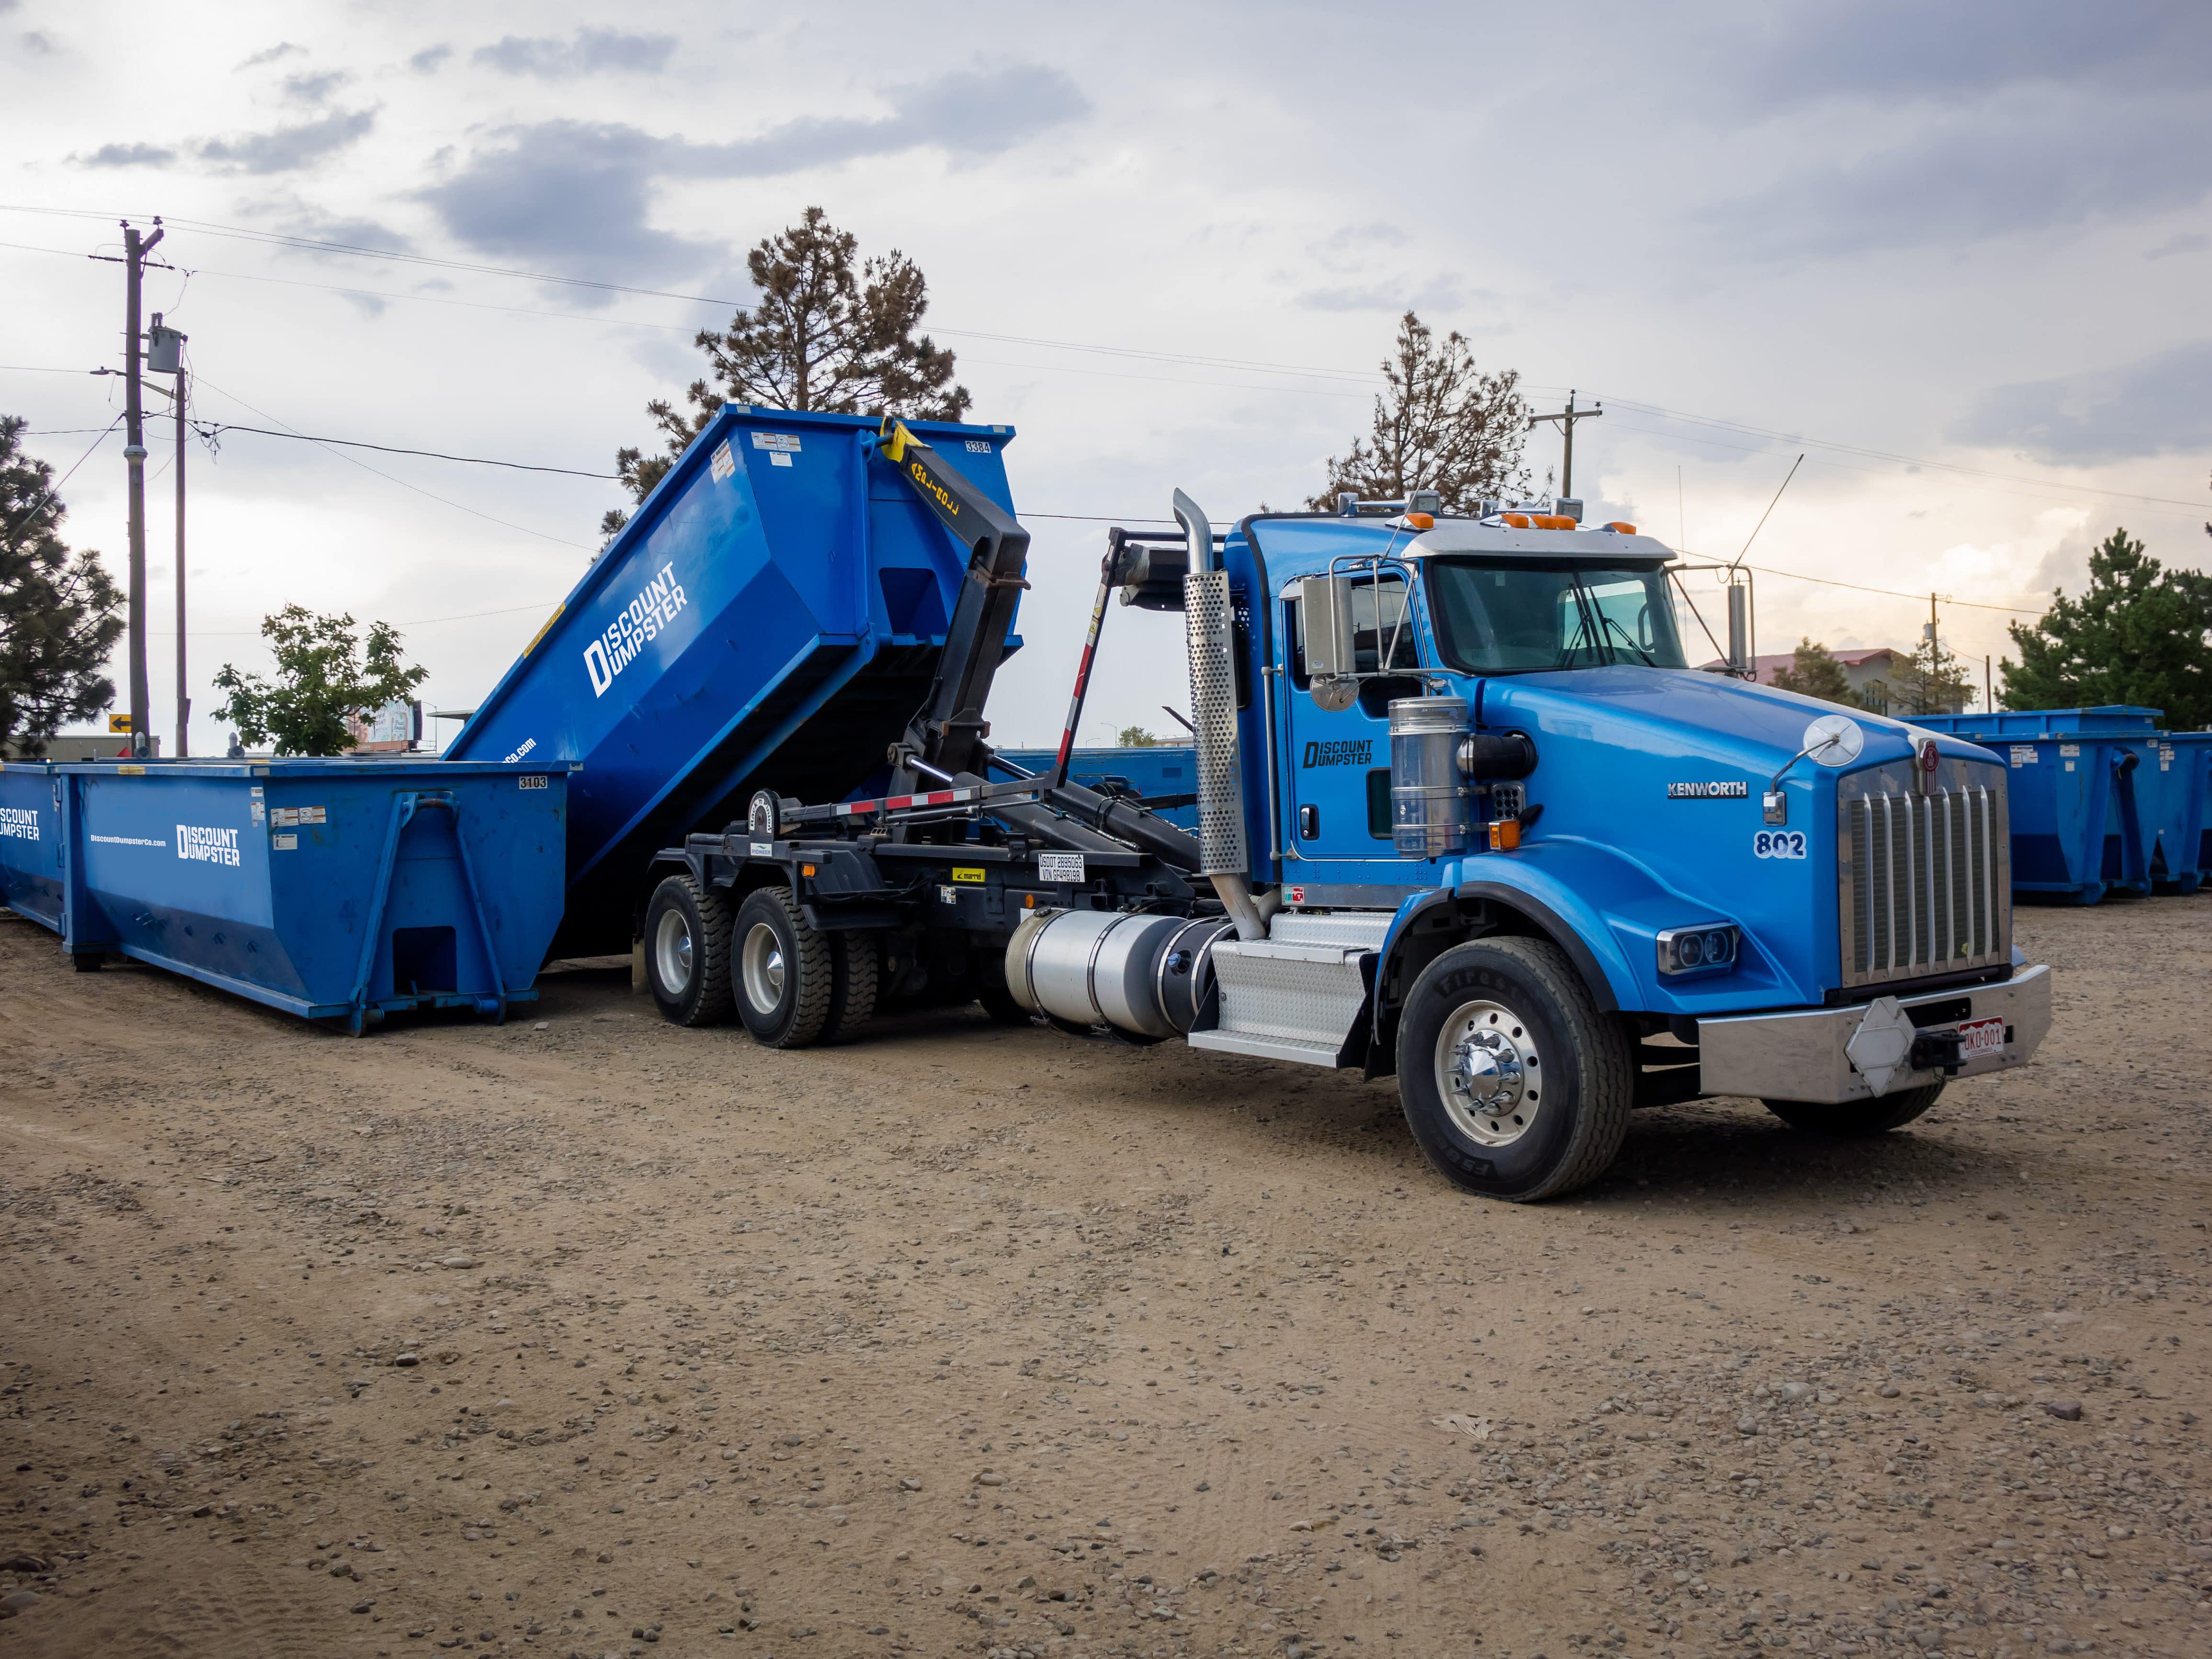 Discount dumpster has affordable rates for roll off dumpsters in Denver co